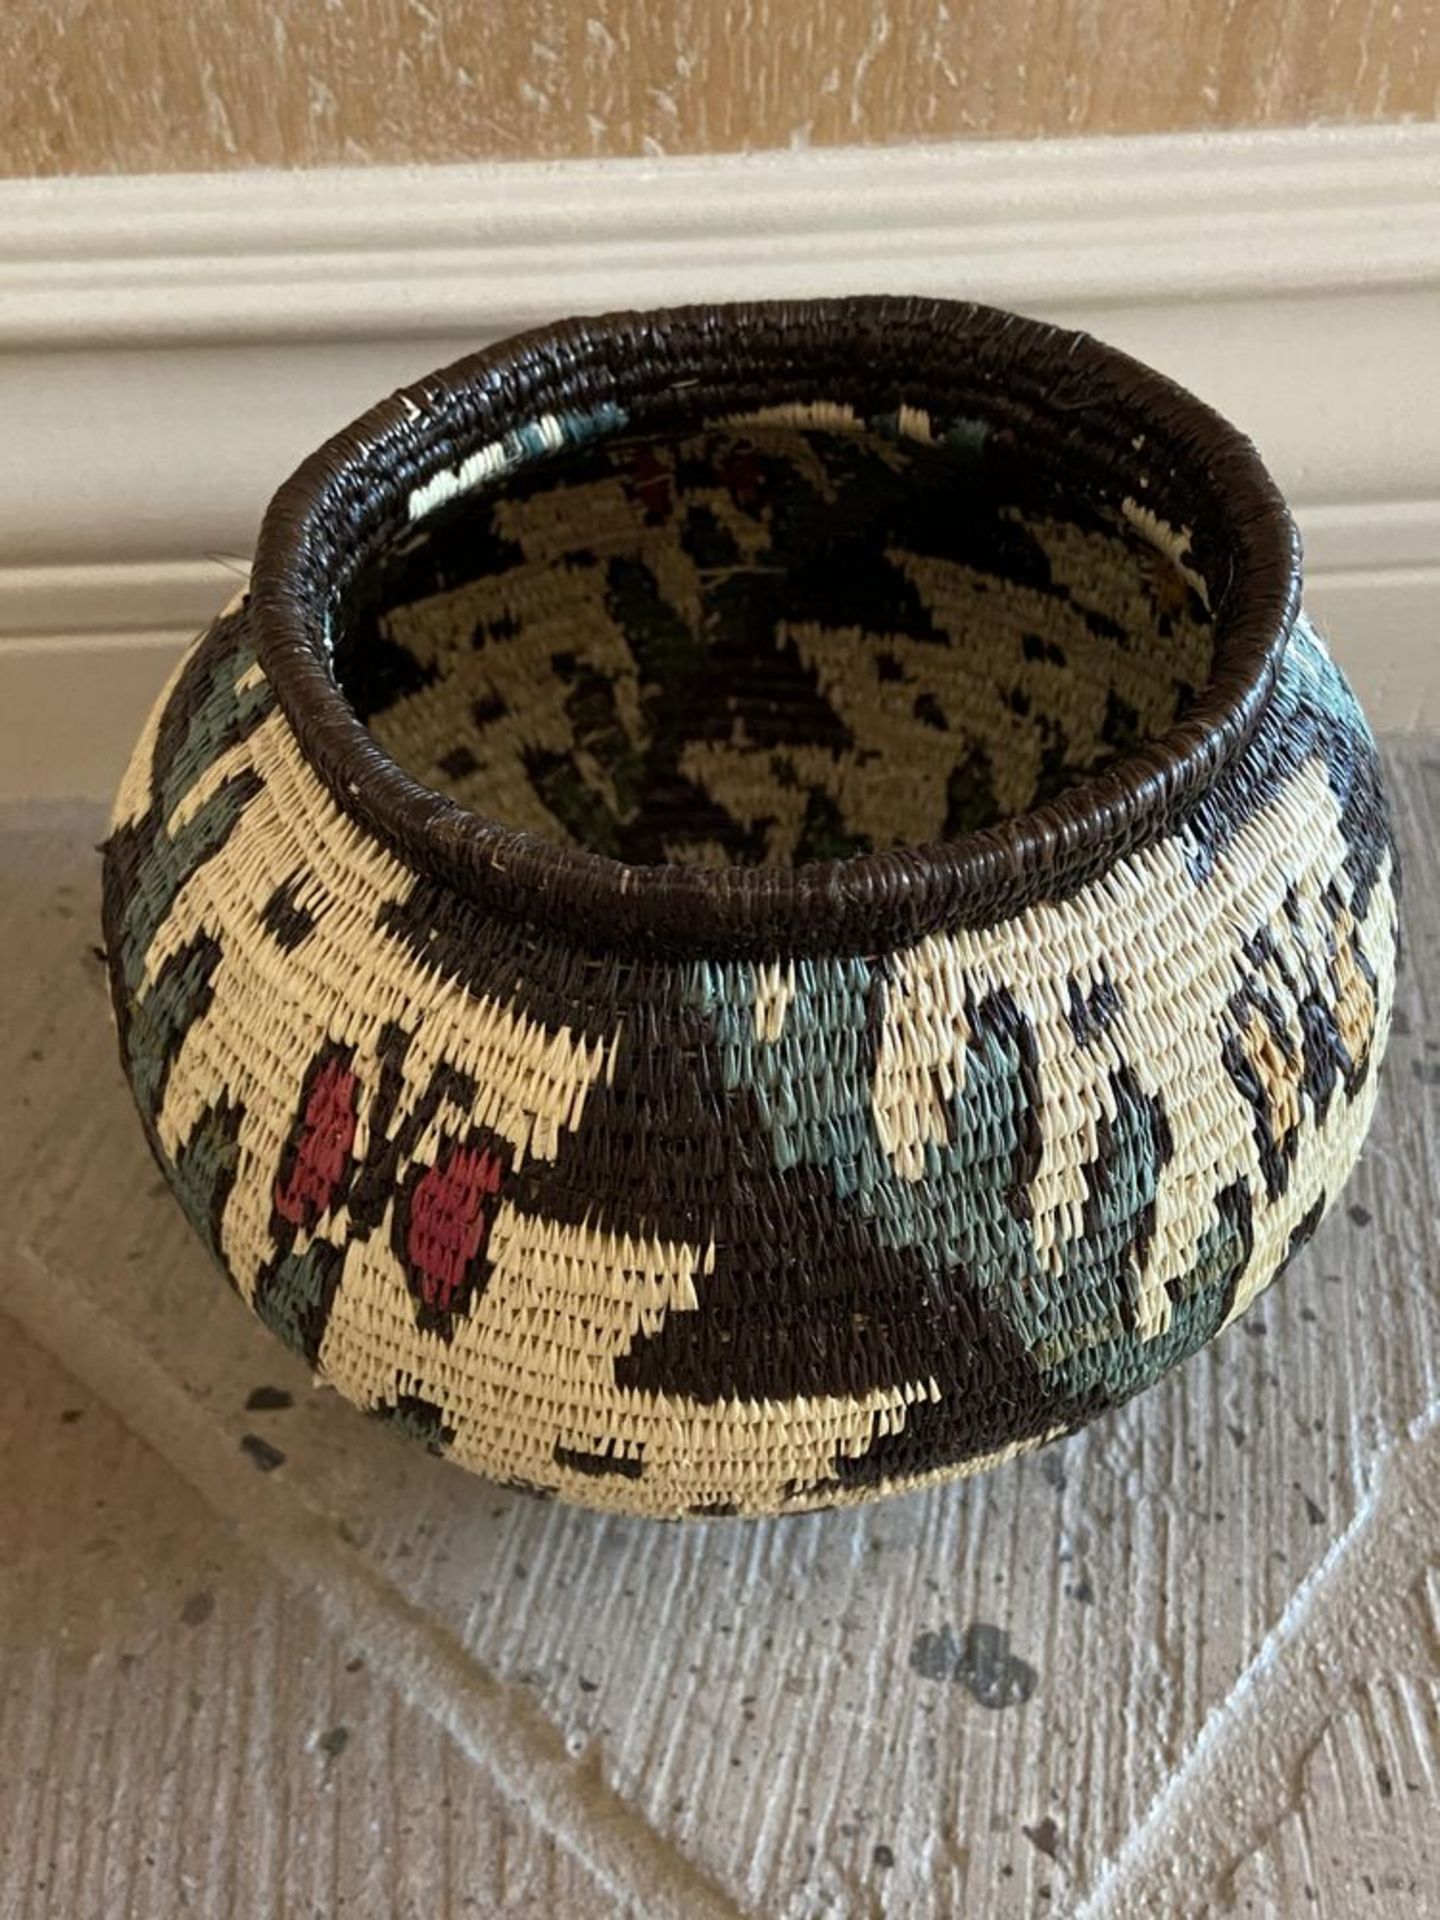 Native American Hand Woven Basket LT15 - Image 2 of 4